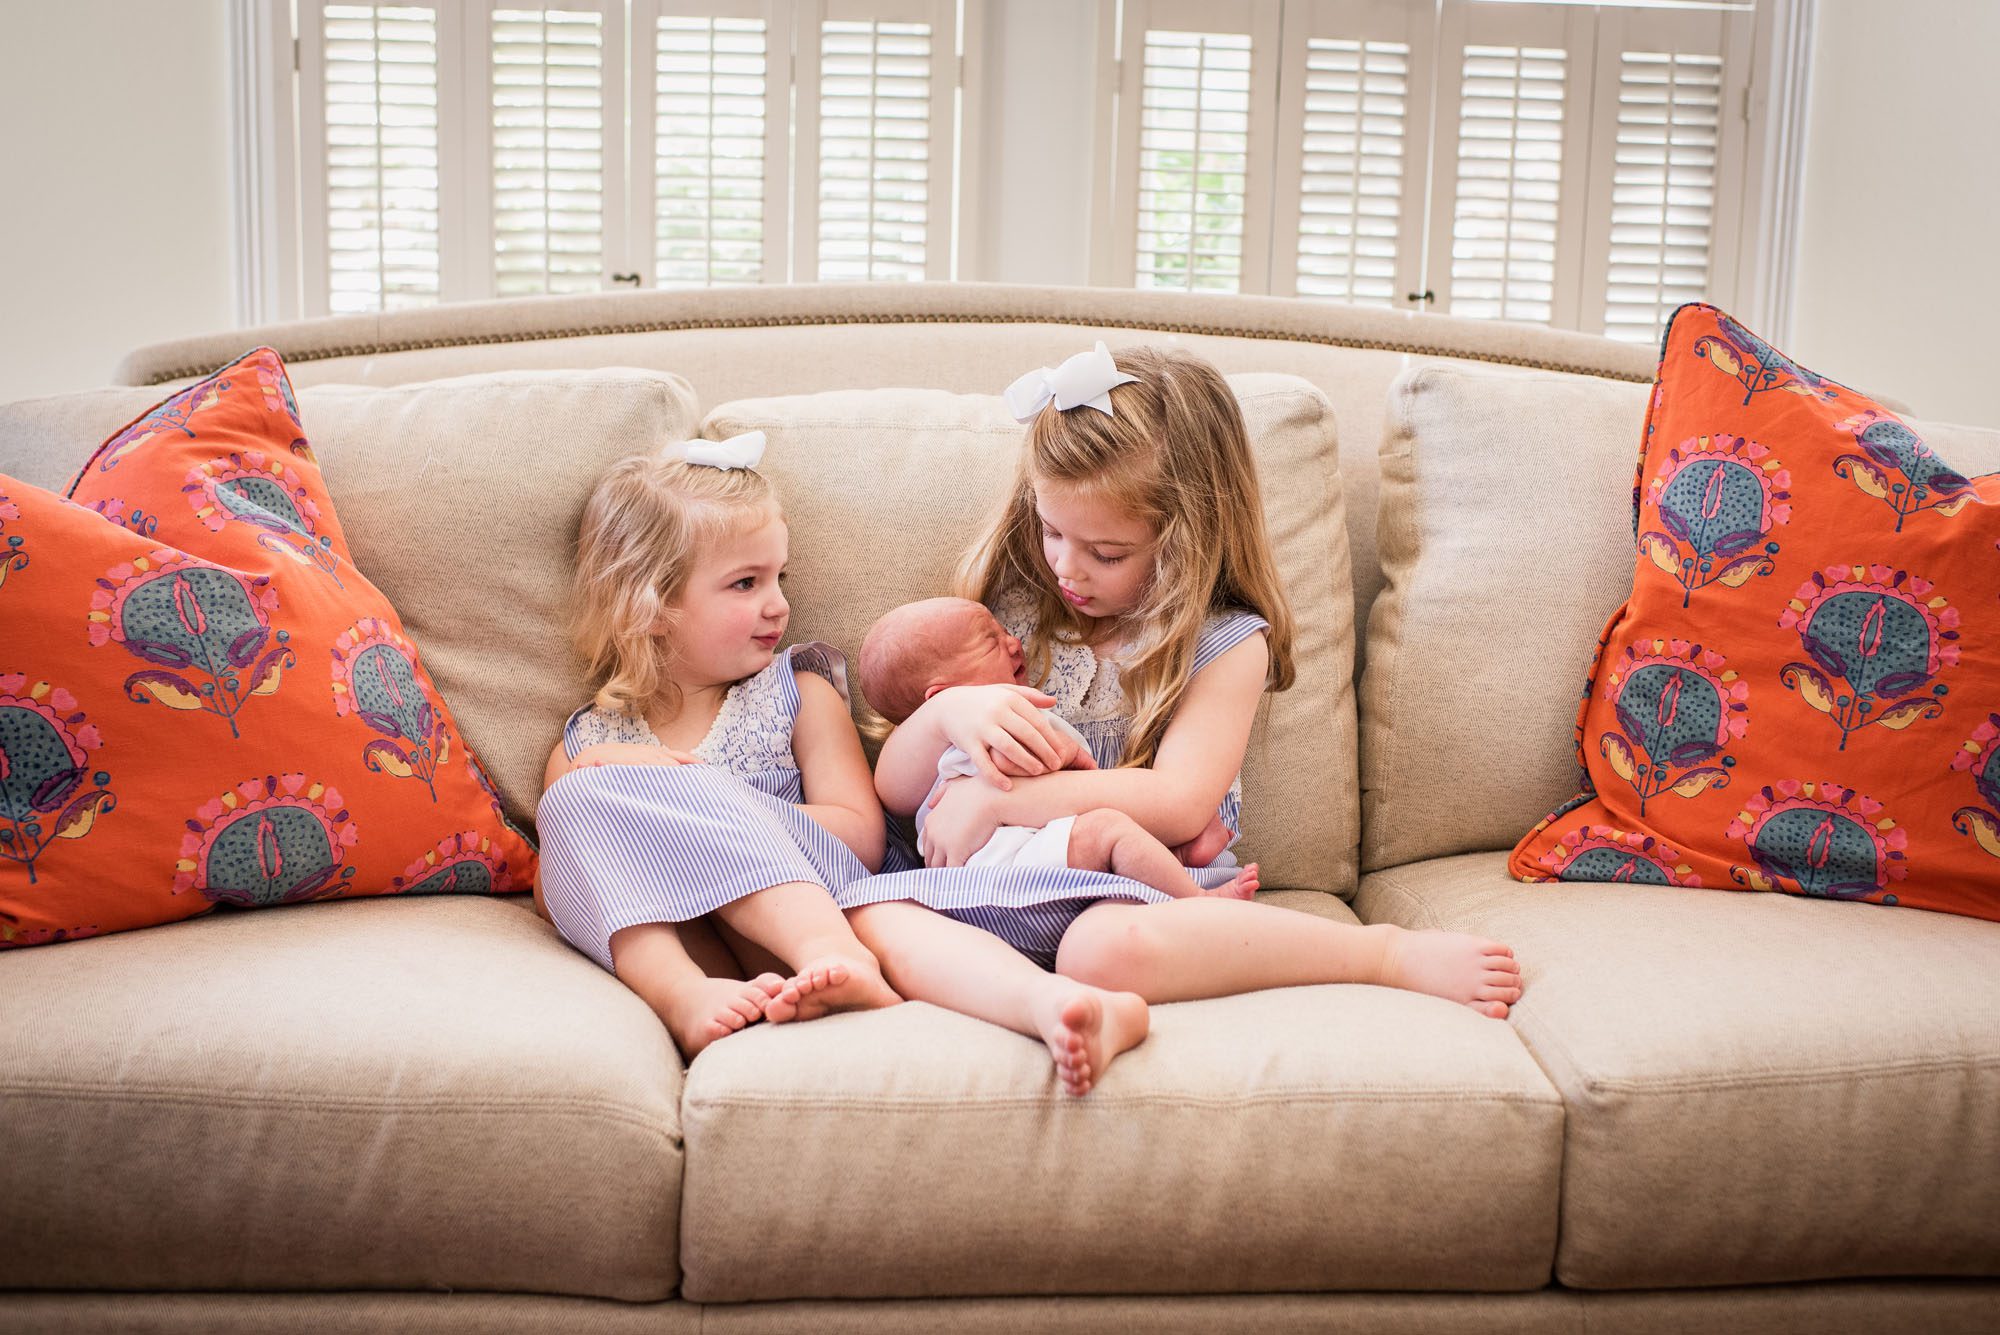 Newborn photographer, sisters on couch with newborn baby